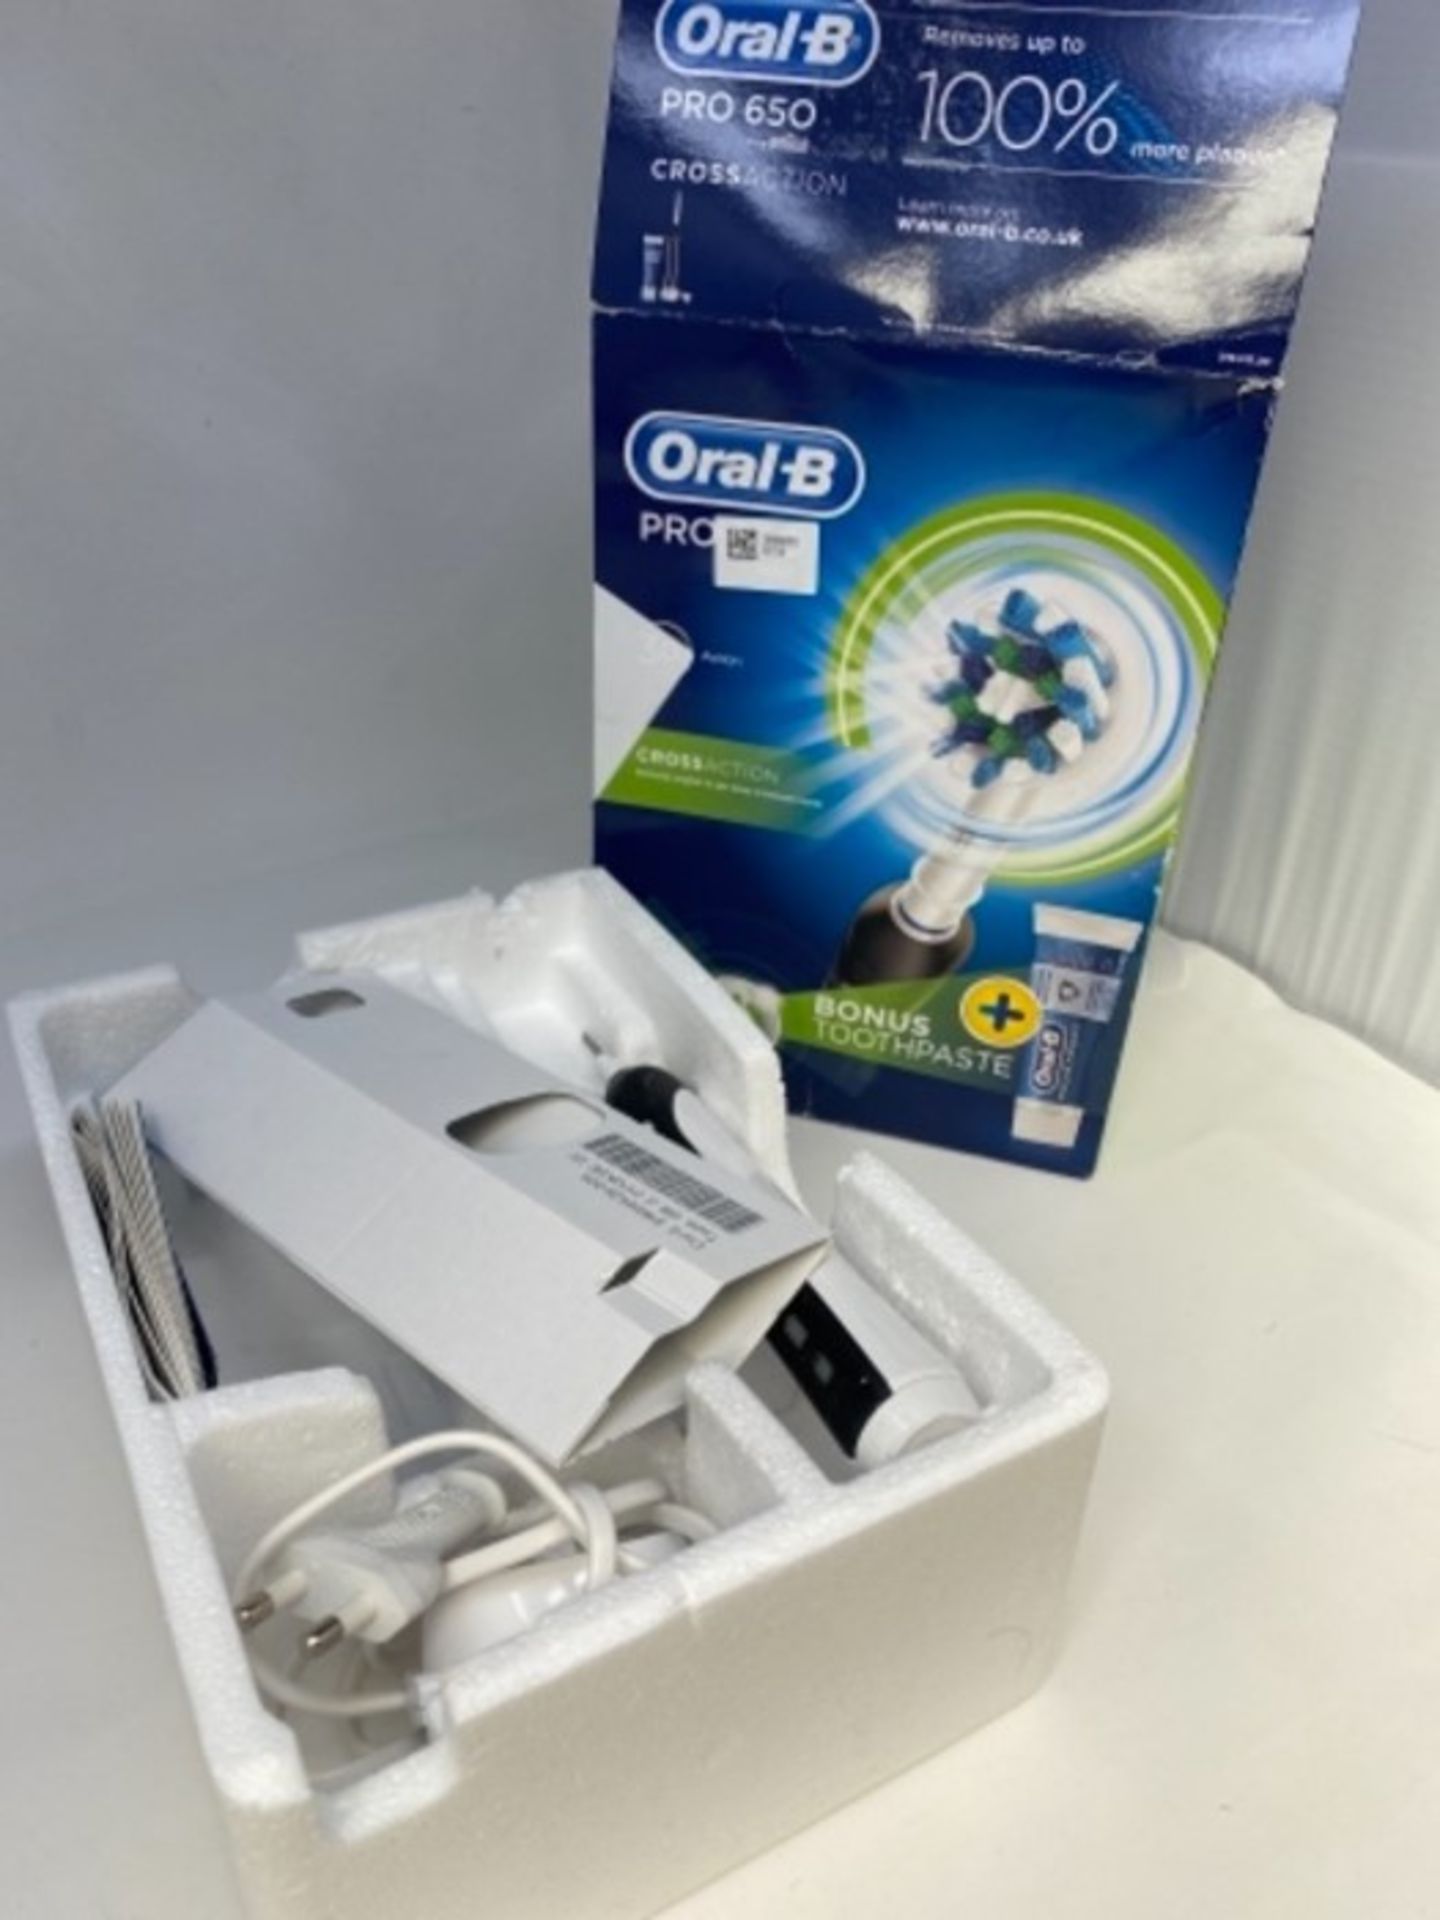 Oral-B Pro 650 Cross Action Electric Rechargeabl